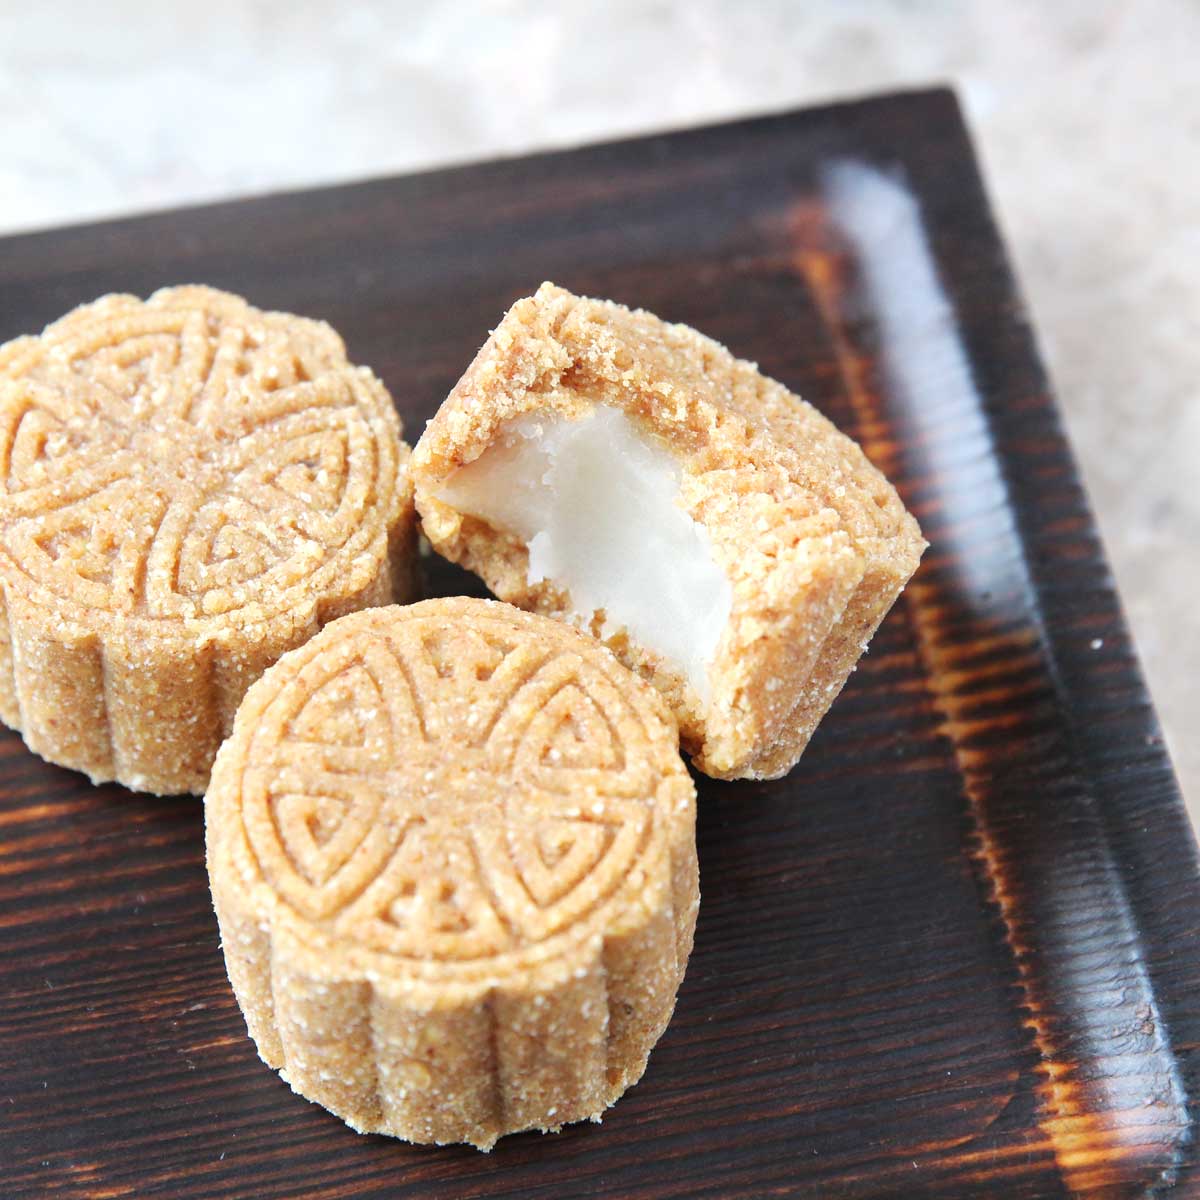 How to Make Chickpea Mooncakes (Vegan, Gluten-Free, High in Protein) - mooncakes